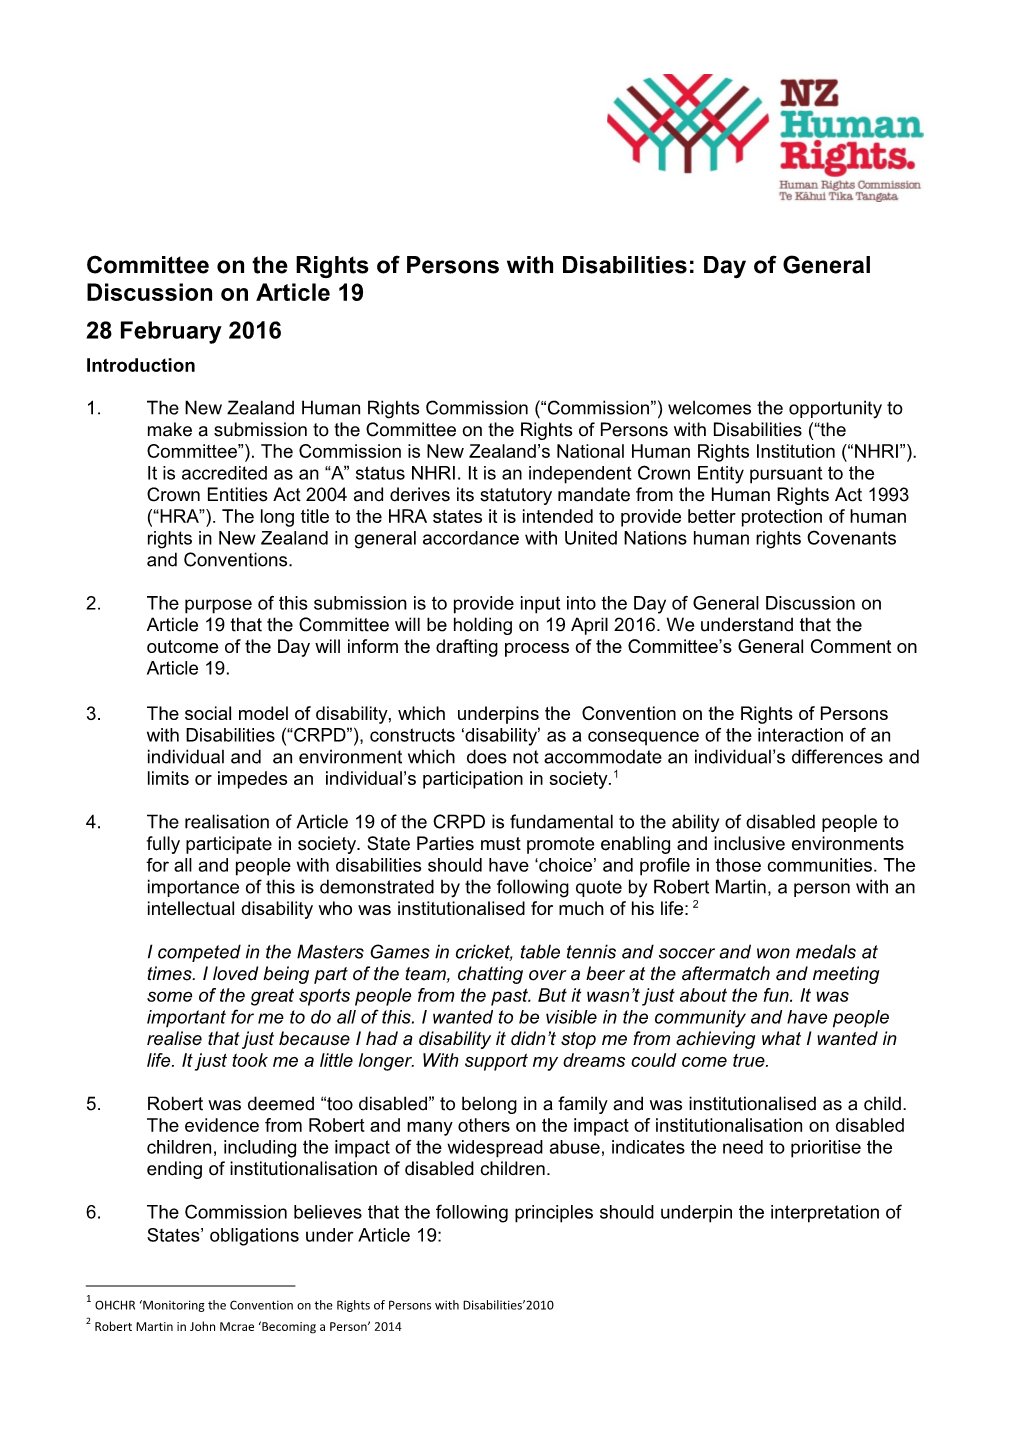 Committee on the Rights of Persons with Disabilities: Day of General Discussion on Article 19